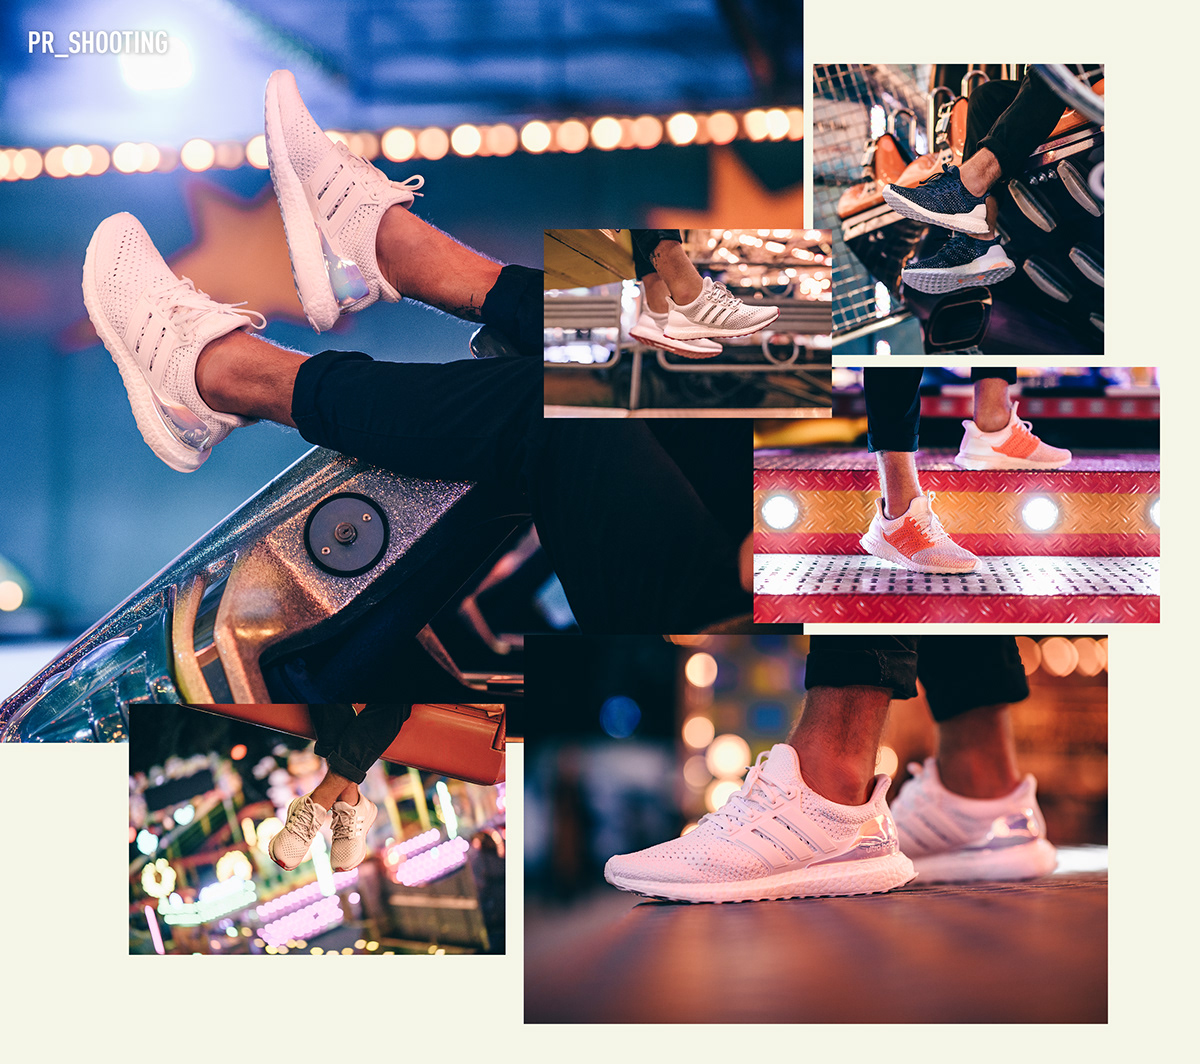 adidas miadidas sneaker ultraboost game Advertising  stefano dessi heimat active never game over funfair